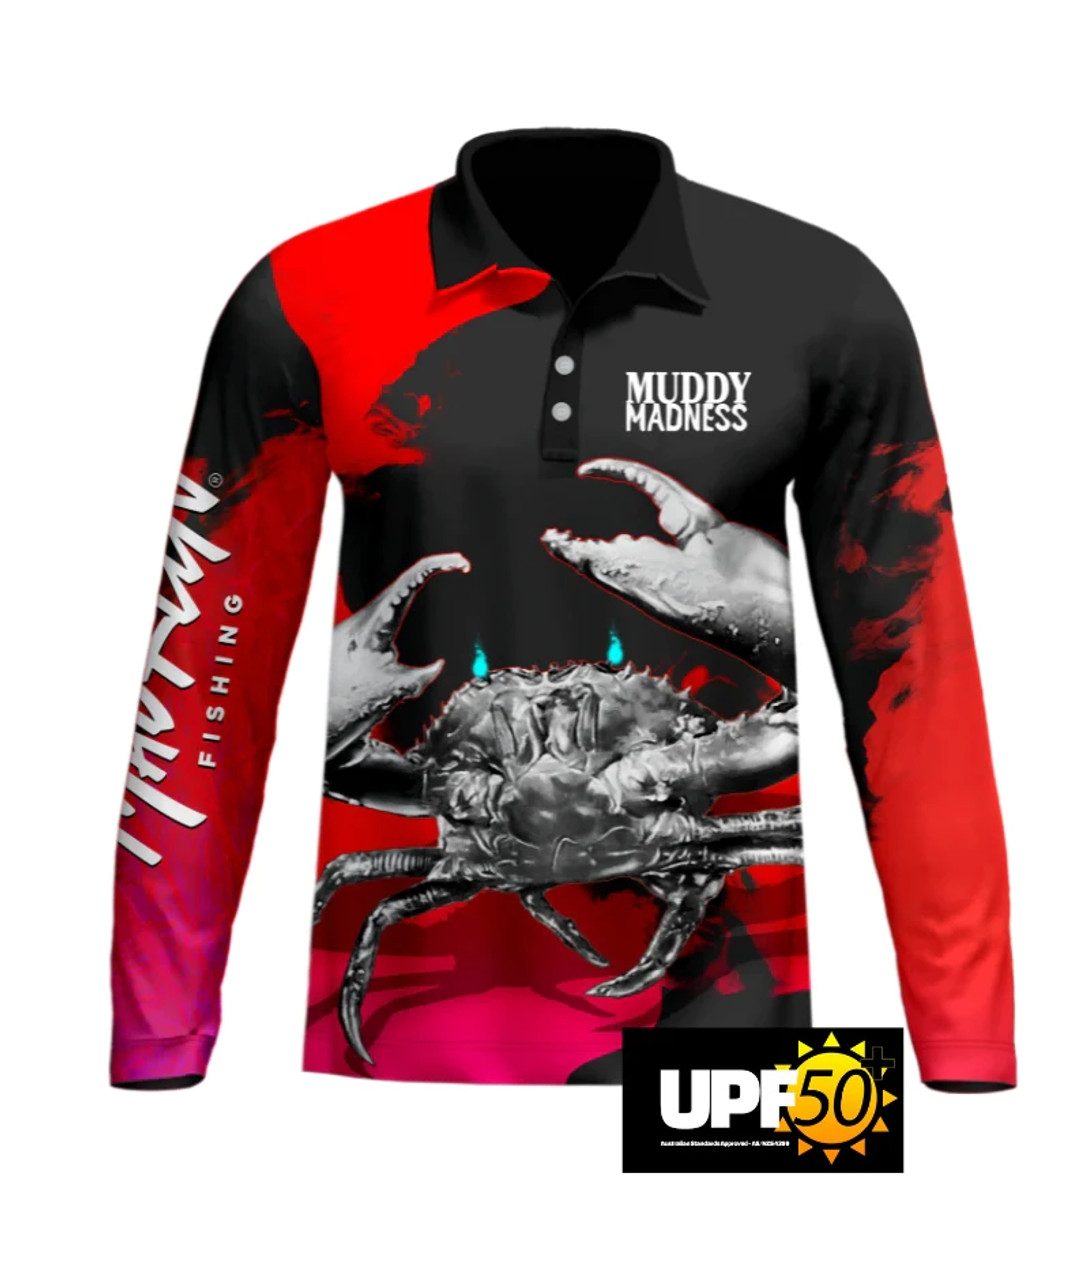 Mad Keen Men's Muddy Madness Fishing Shirt - Black/Red - Kimberley Country  Department Store